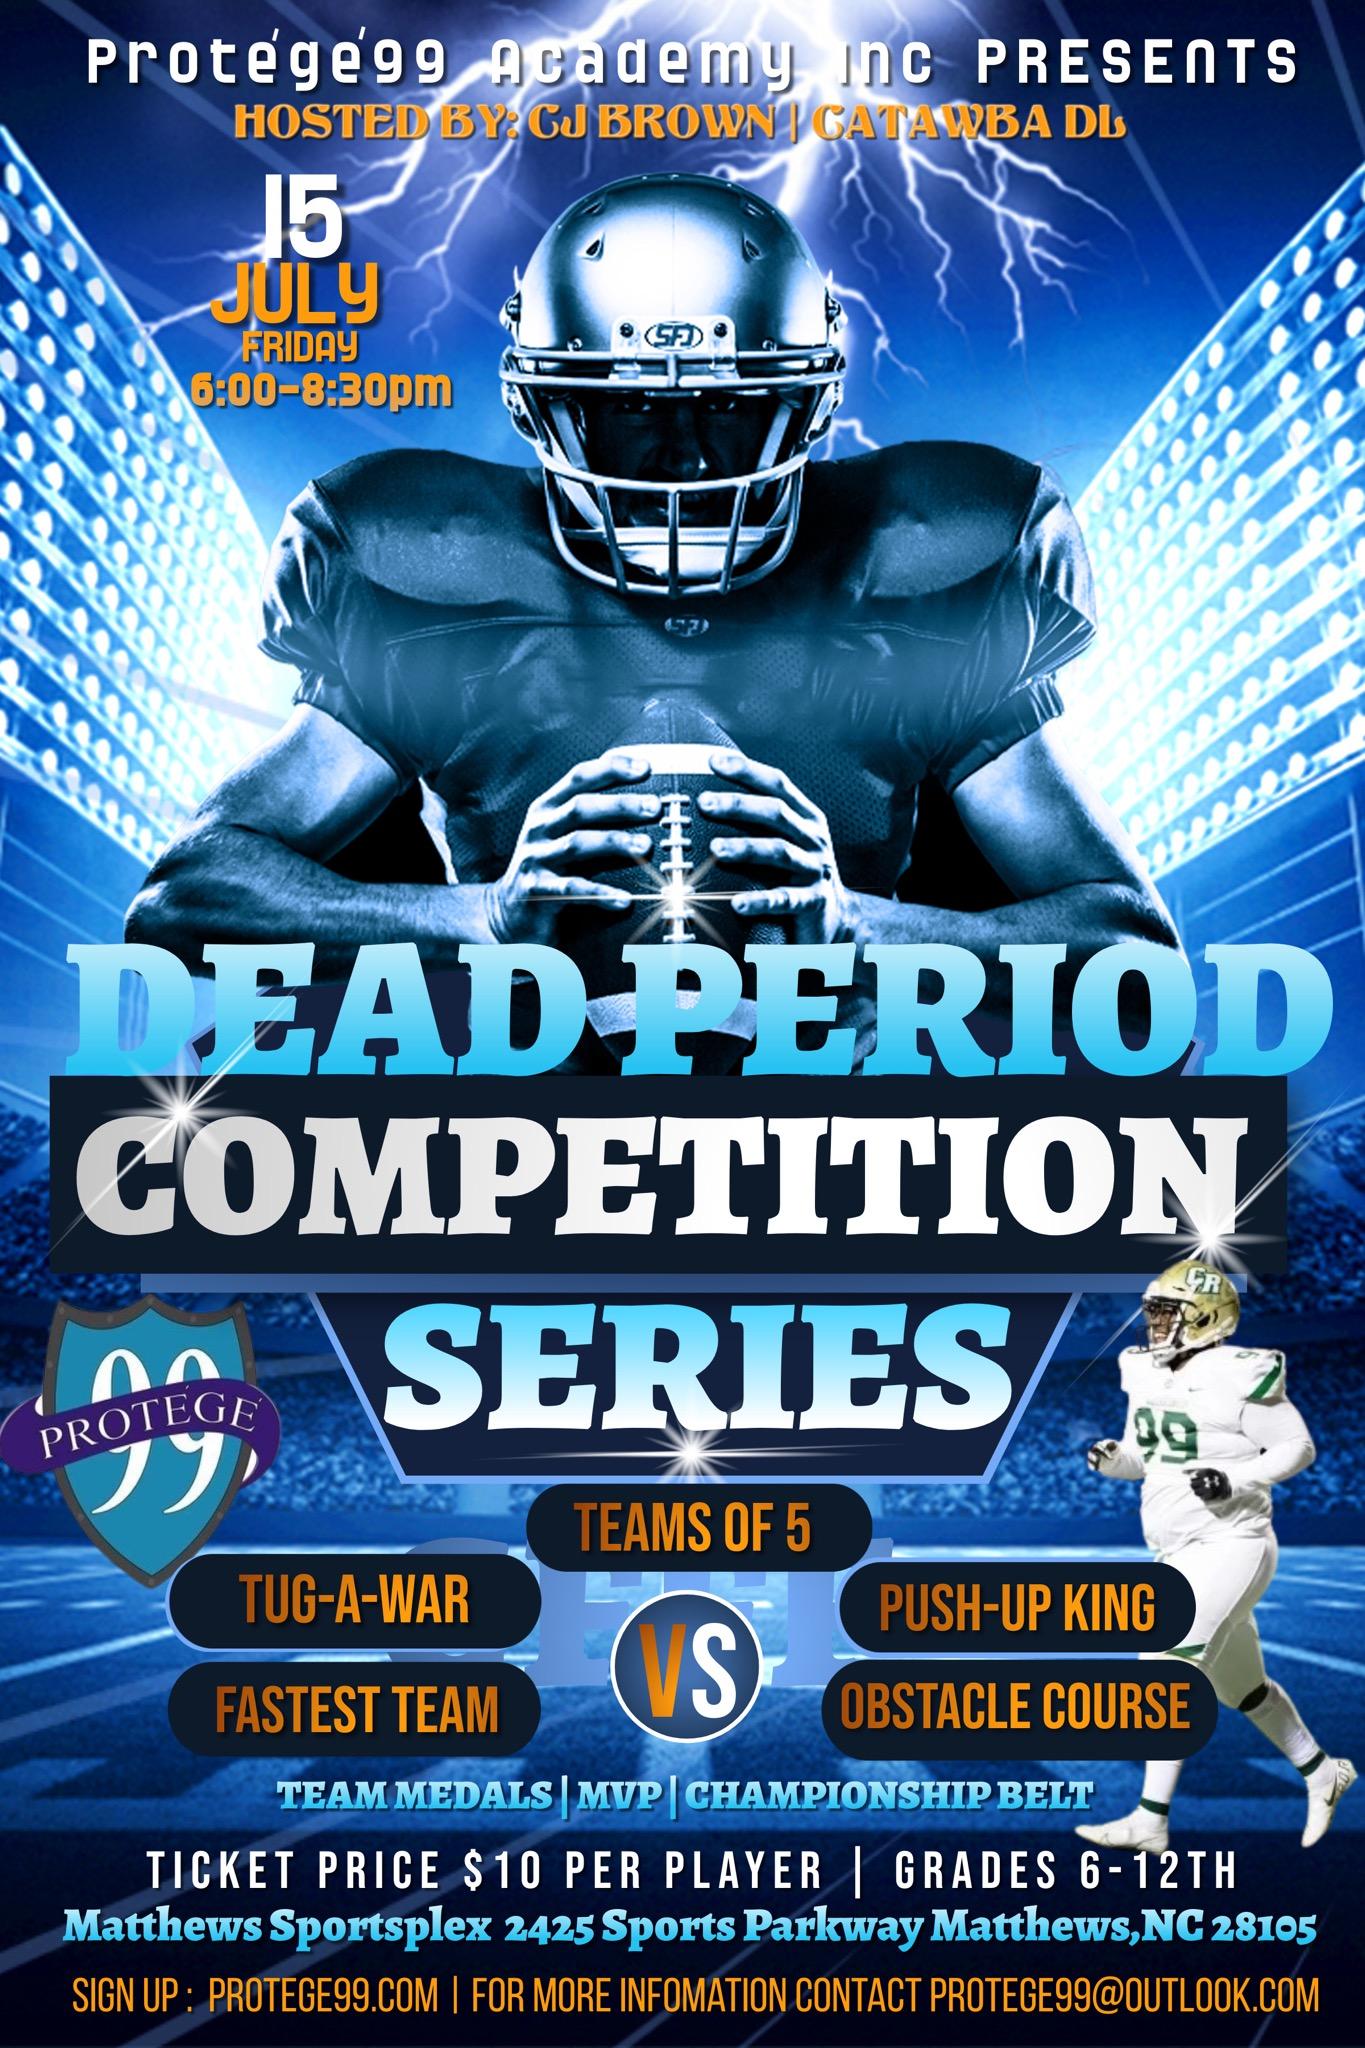 Protege99 Dead Period Competition Series 2022 Flyer